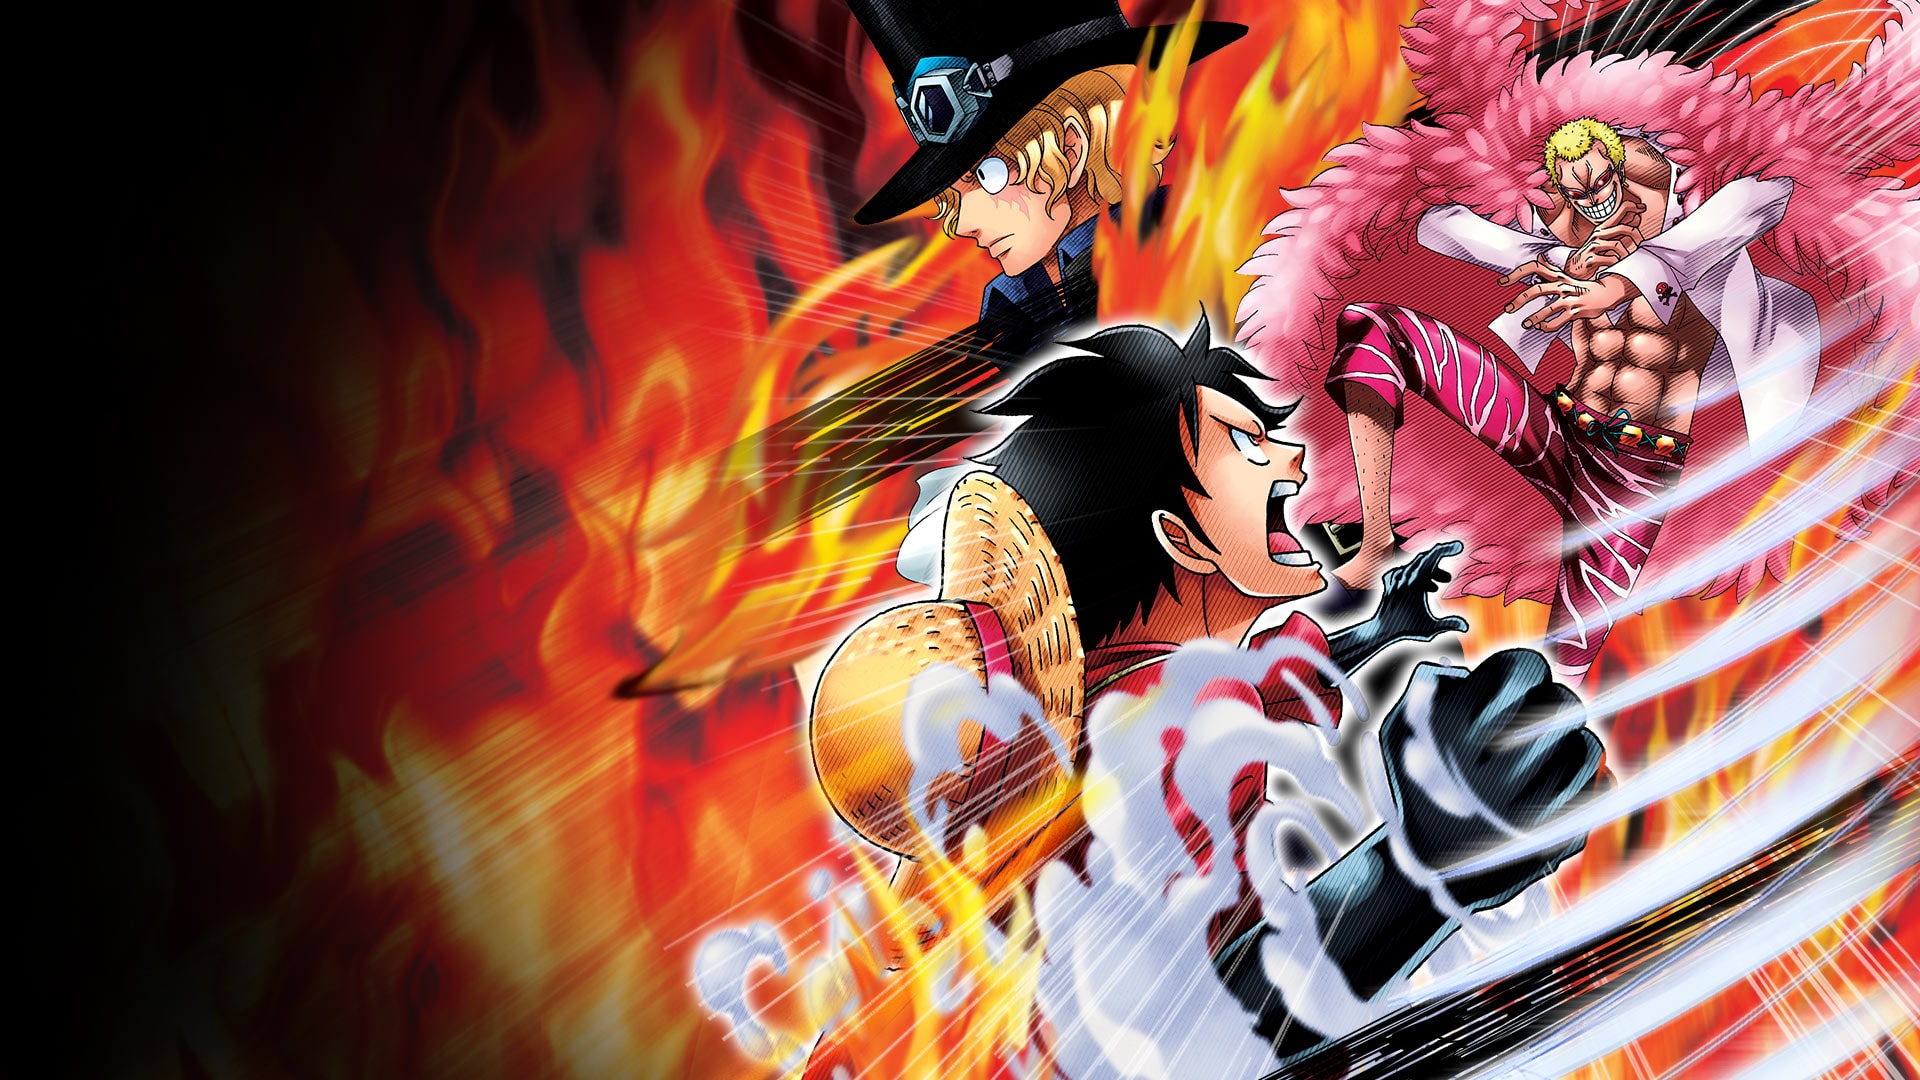 One Piece: Burning Blood Playable Character Pack